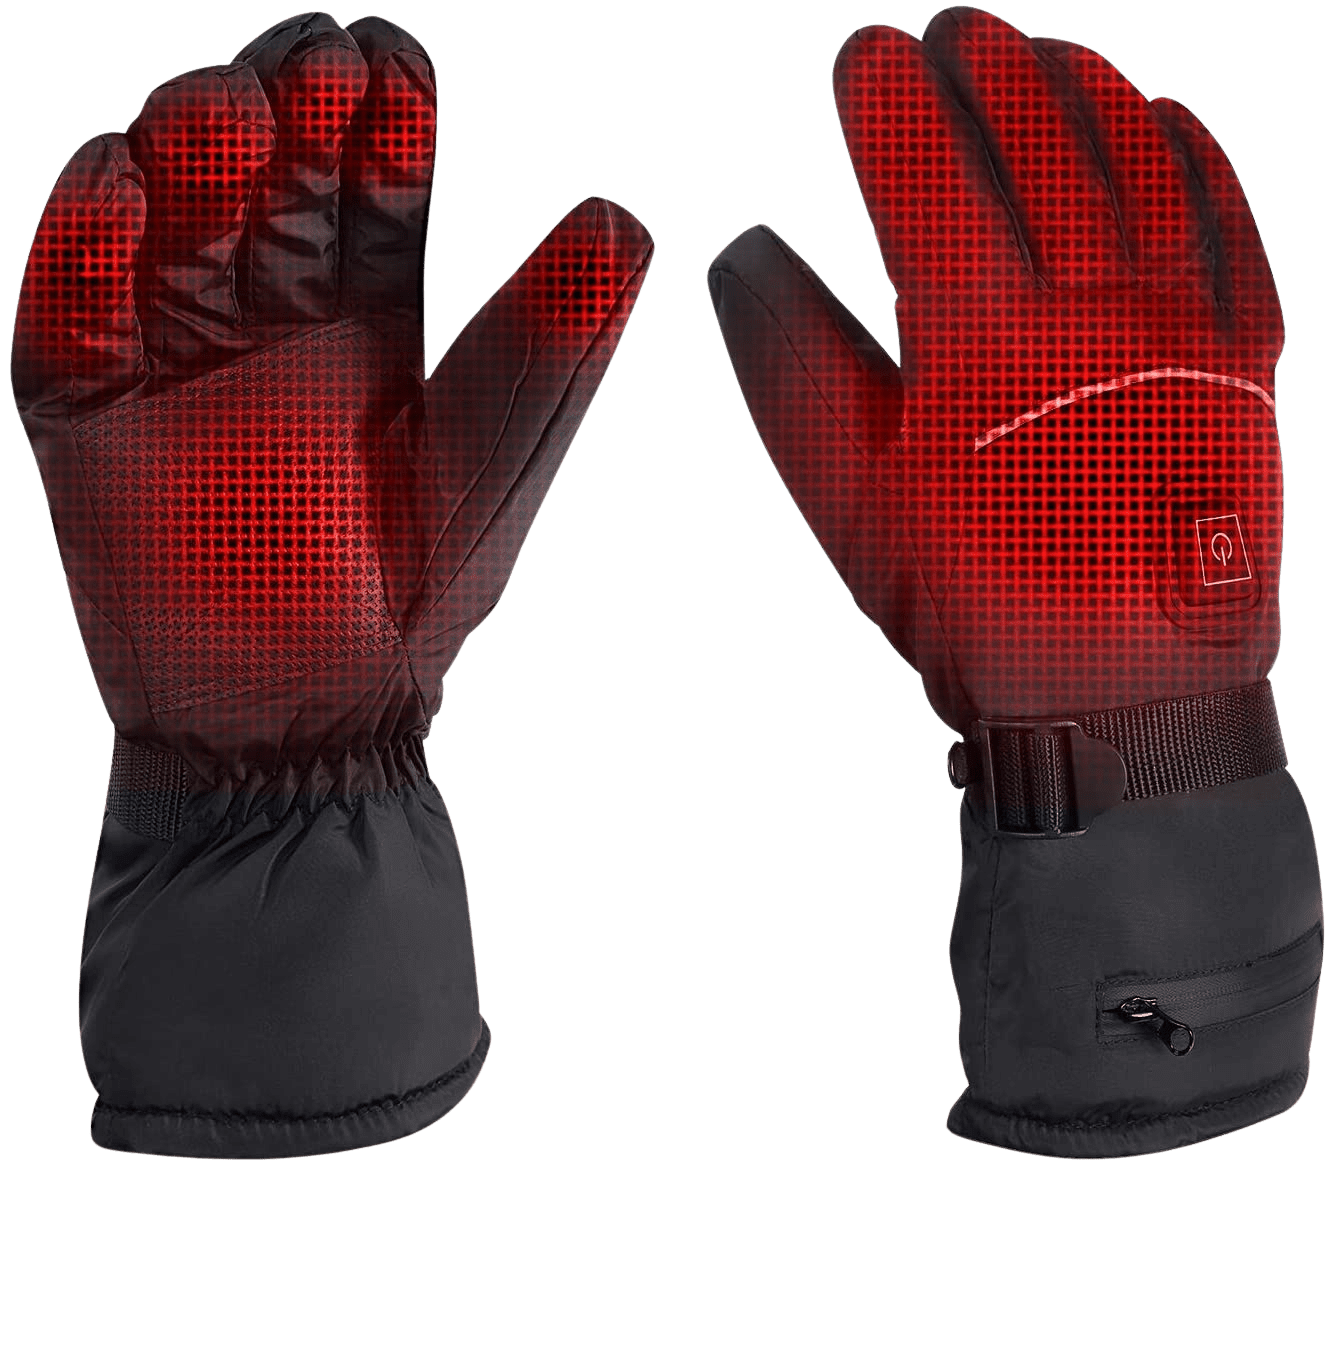 Heated Gloves for Women and Men, Guoguo Rechargeable Winter Heating Gloves for Arthritis Hands, Cold Weather Gloves for Hiking Fishing Hunting Skiing Sledding Cycling and More - Home Decor Gifts and More